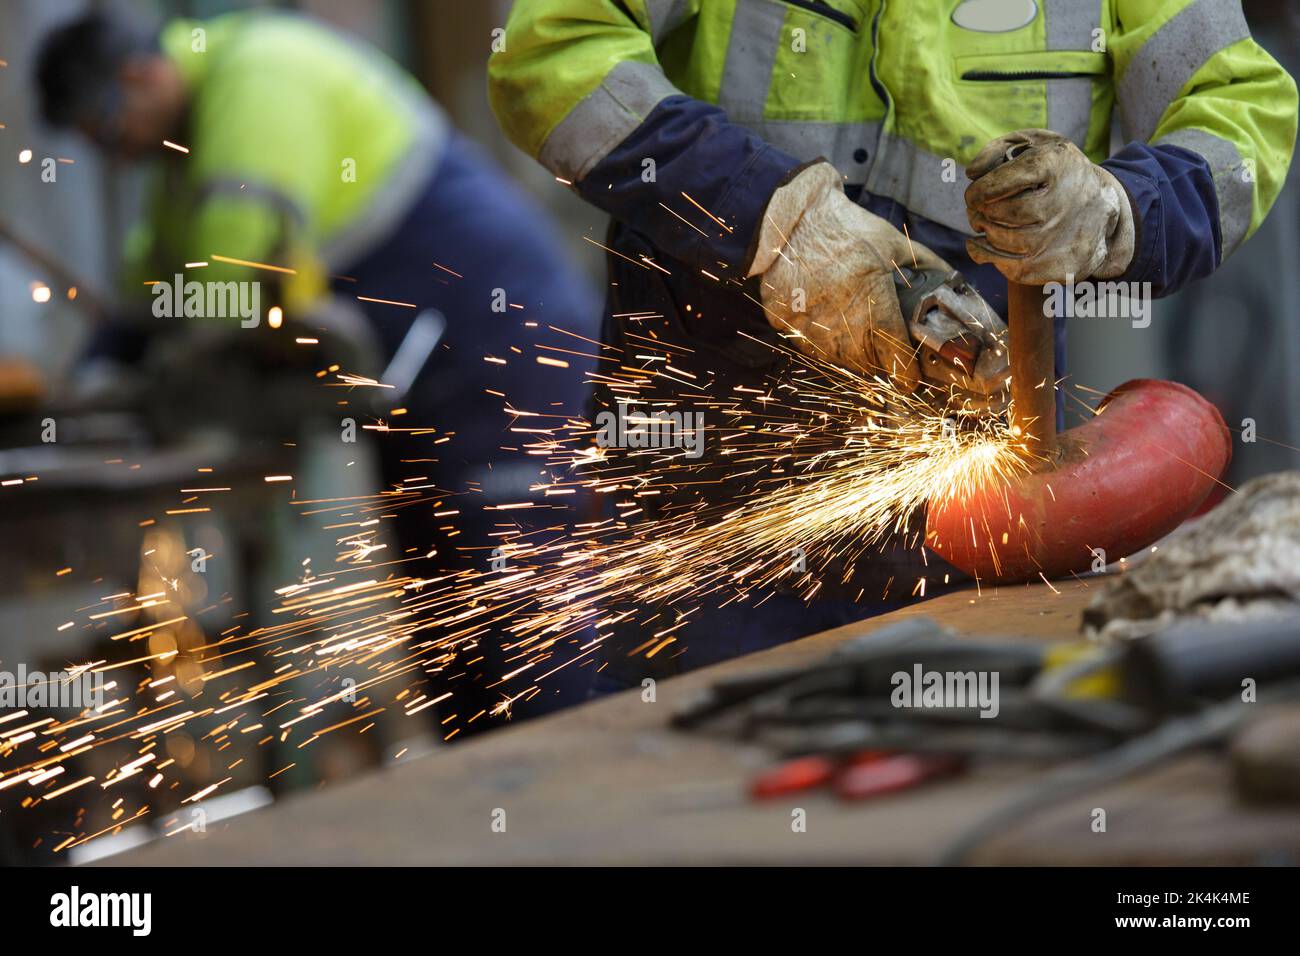 worker grinding cutting metal sheet with grinder machine Stock Photo